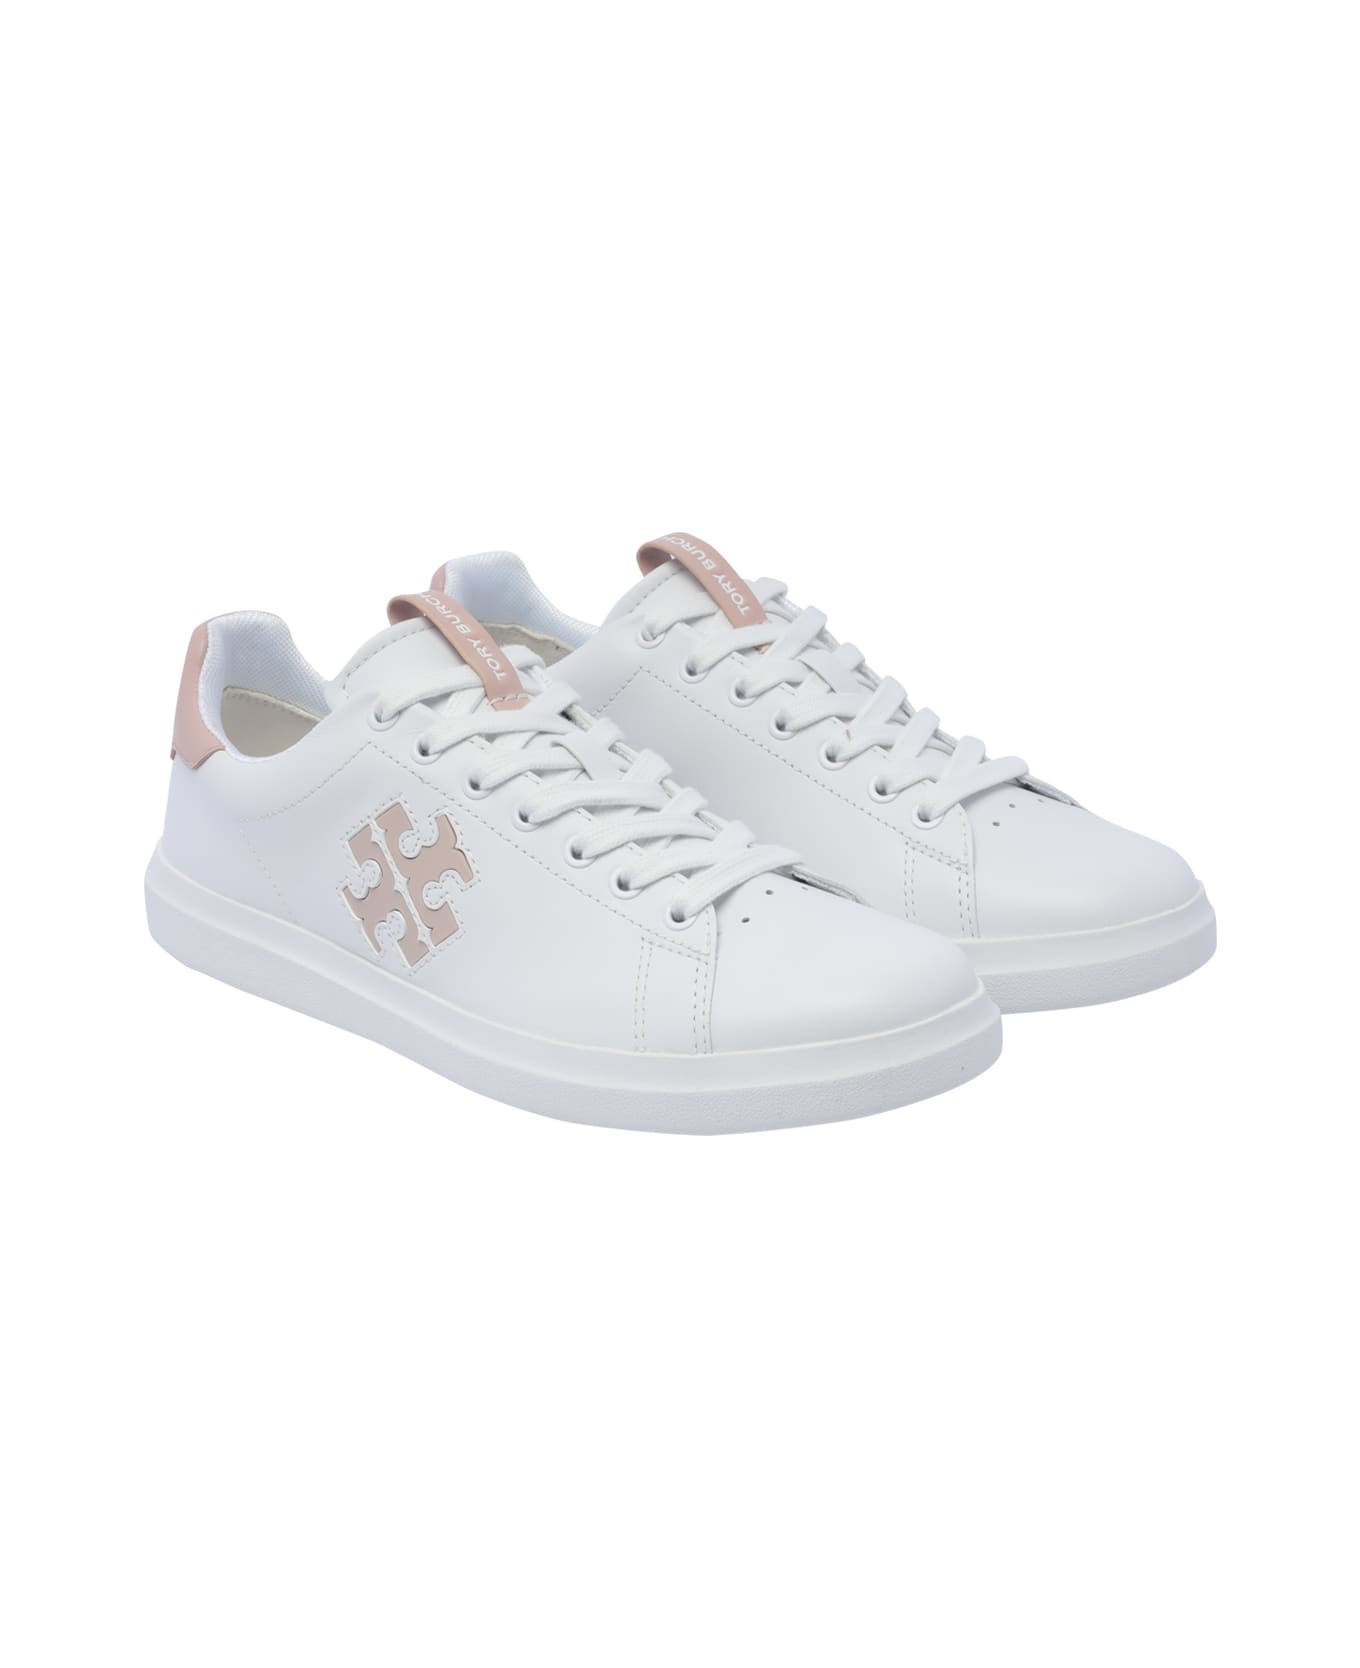 Tory Burch Good Luck Trainer Sneakers - White スニーカー